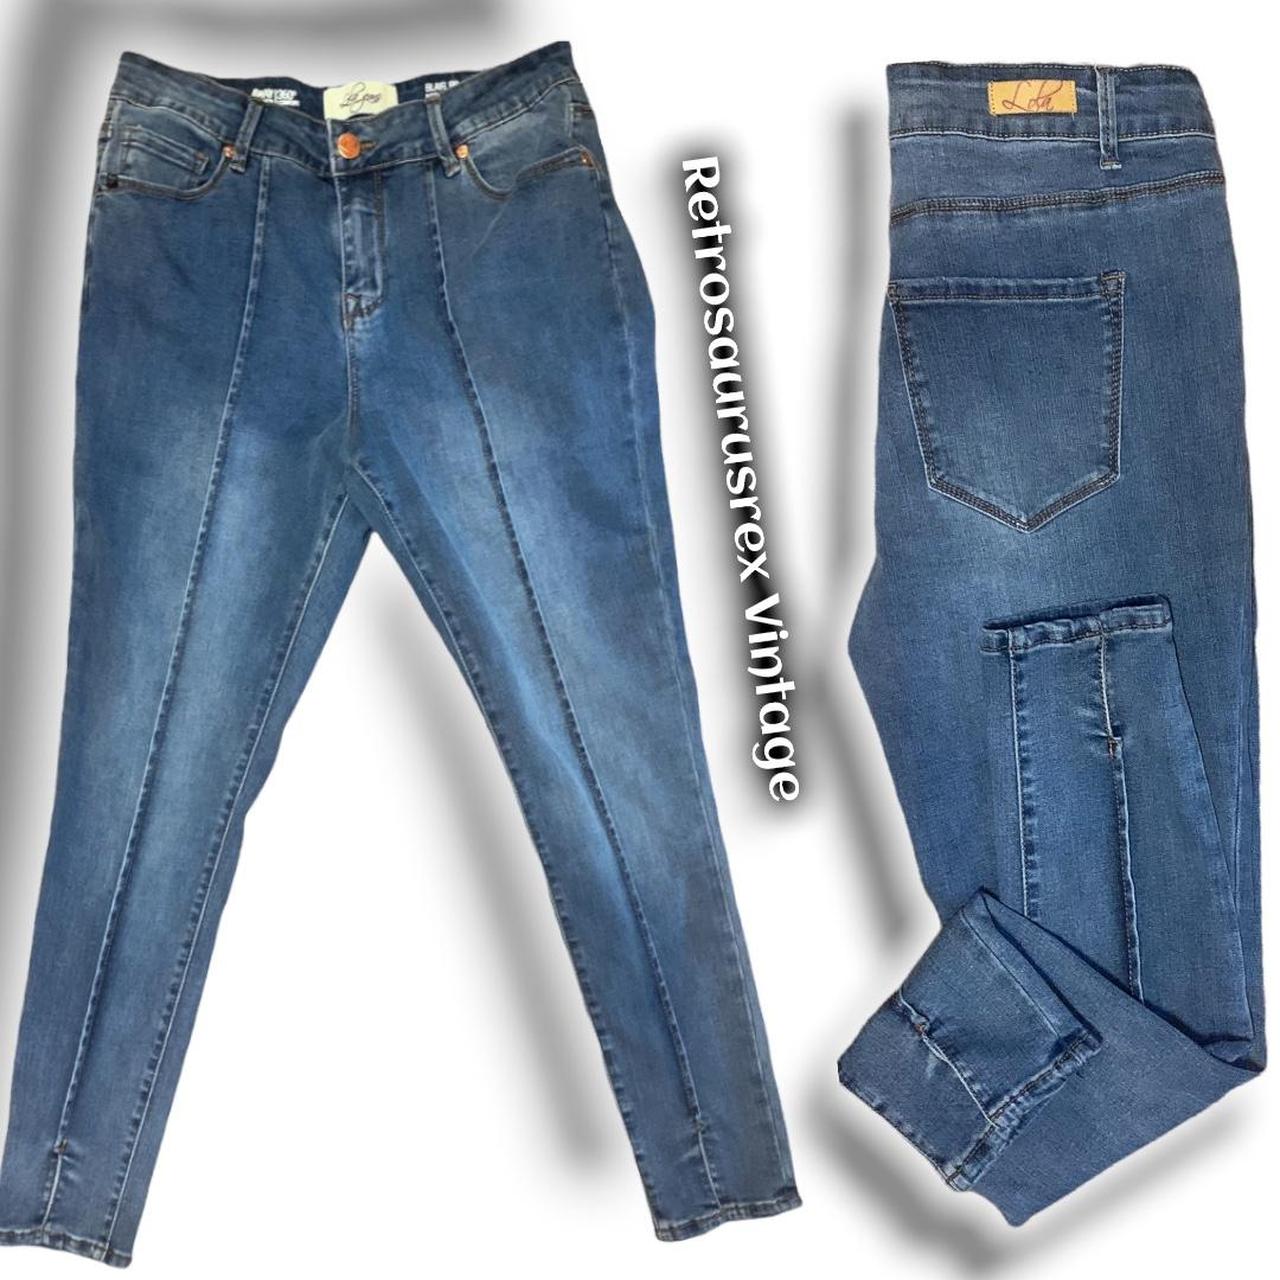 Product Image 1 - #Lola Jeans #Blair RB #MidRise